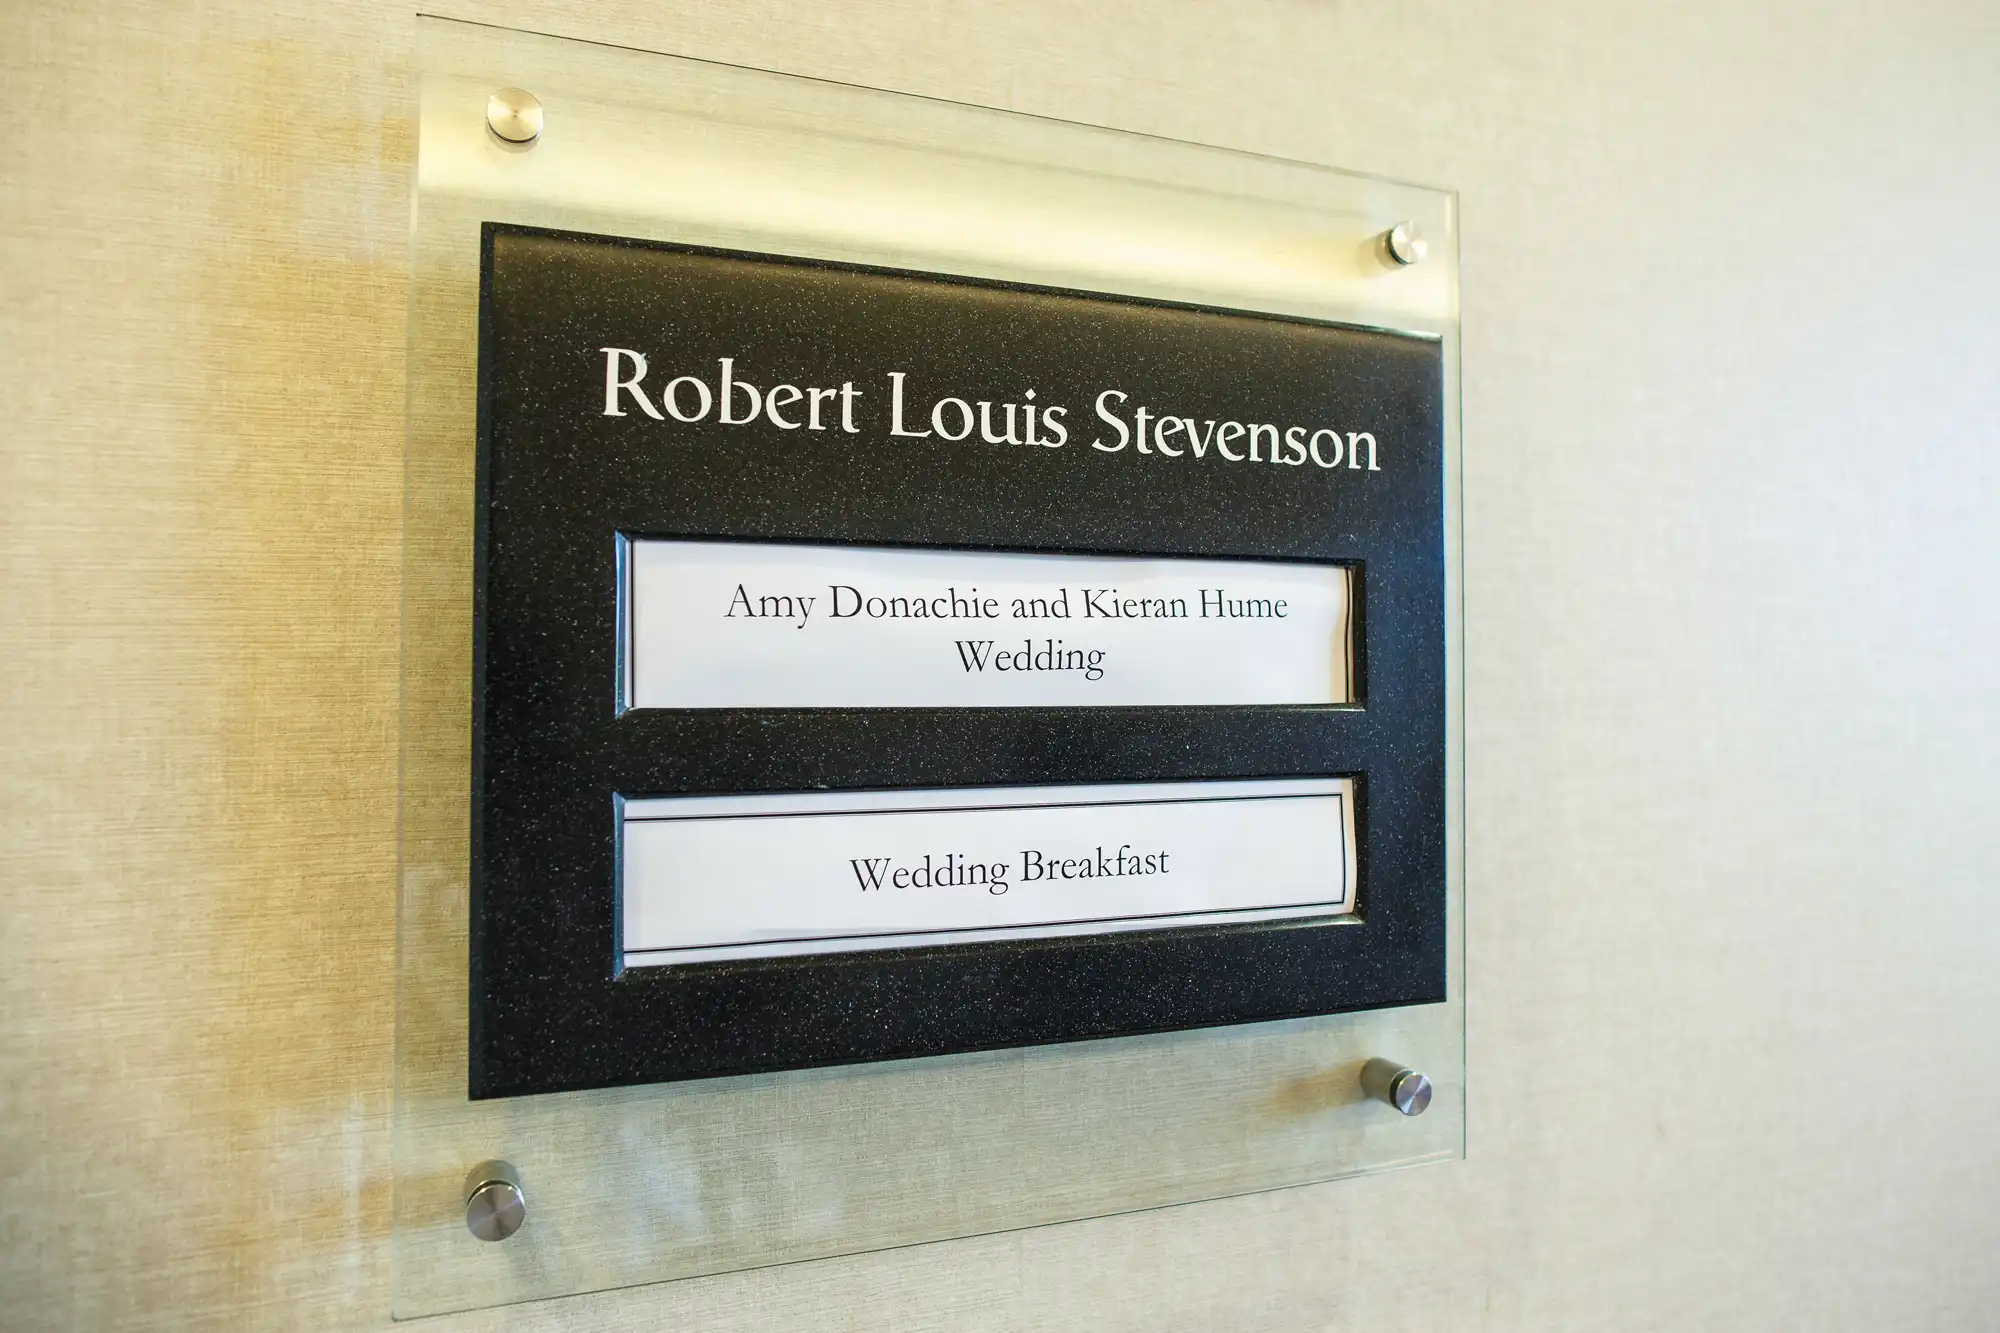 A plaque on a wall titled "robert louis stevenson" with subtext reading "amy donachie and kieran hume wedding" and "wedding breakfast" below.